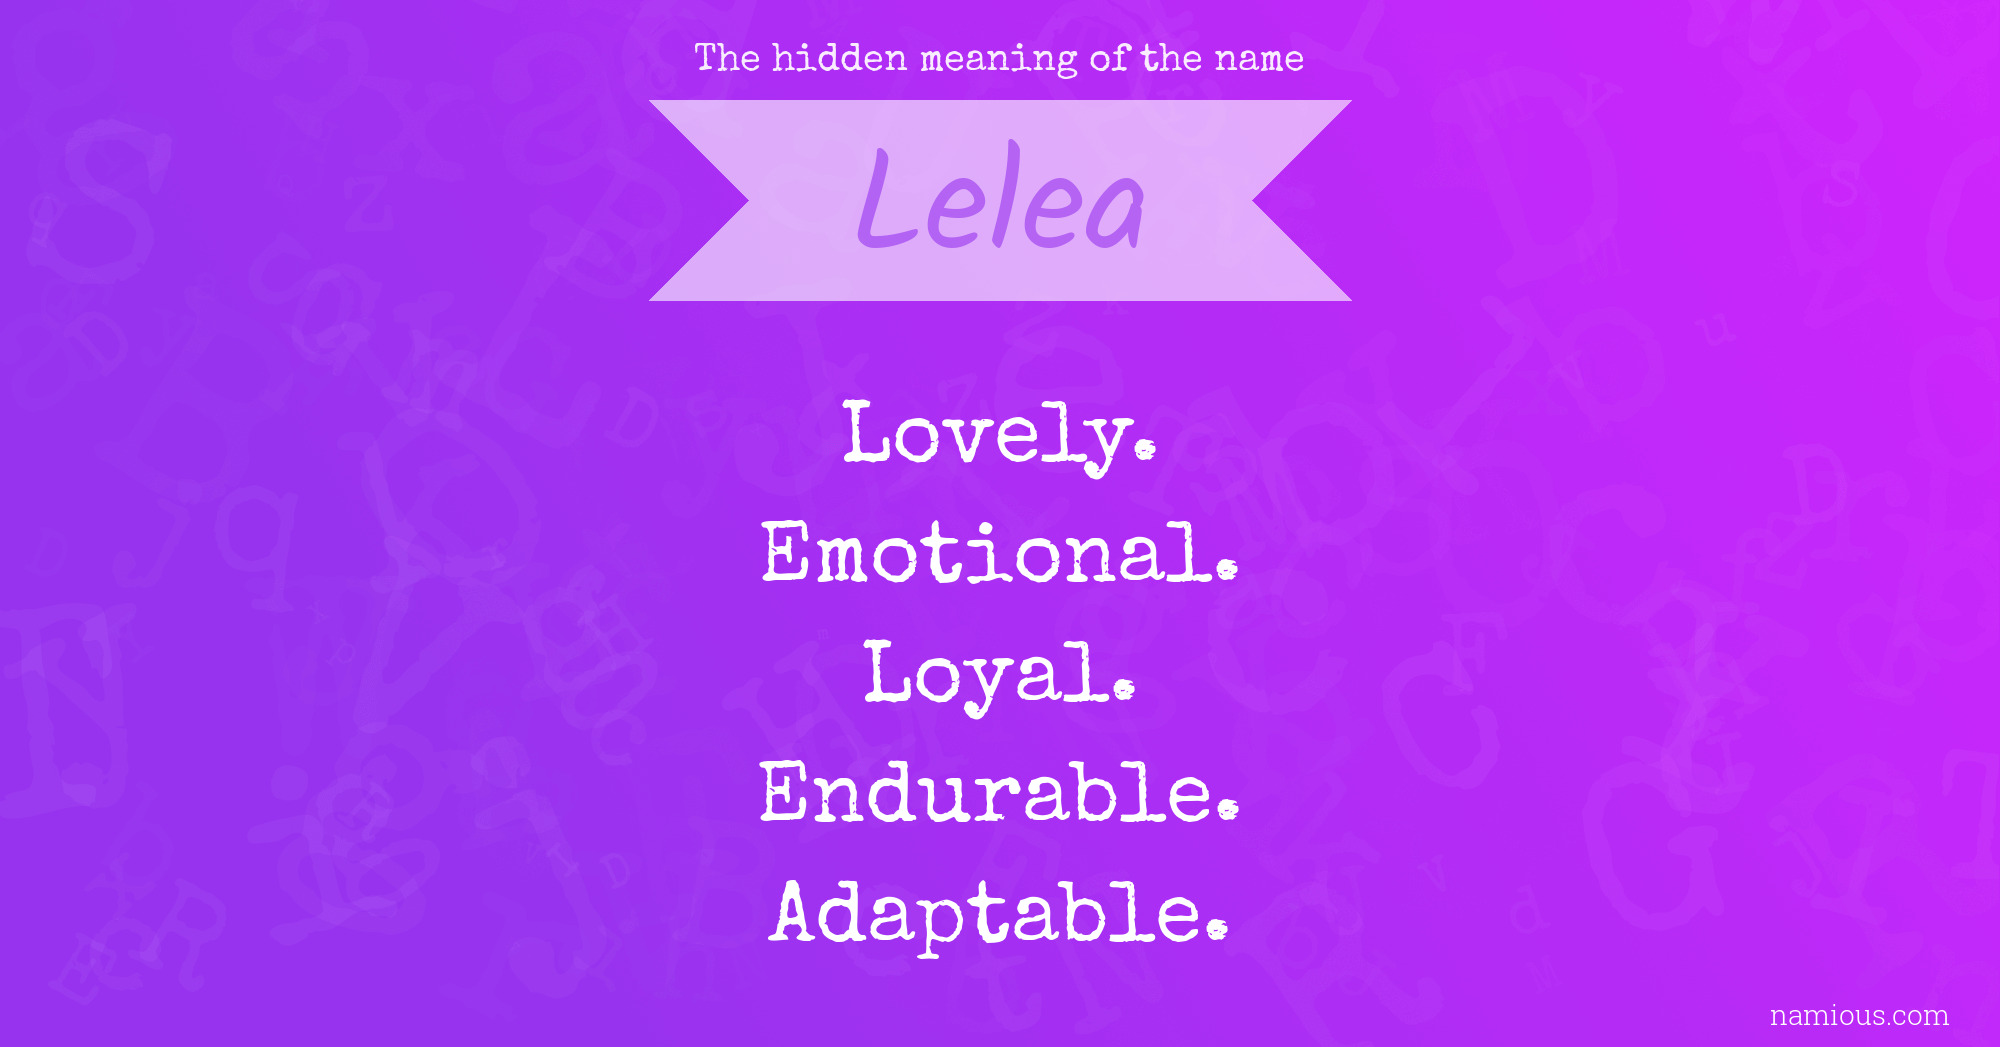 The hidden meaning of the name Lelea